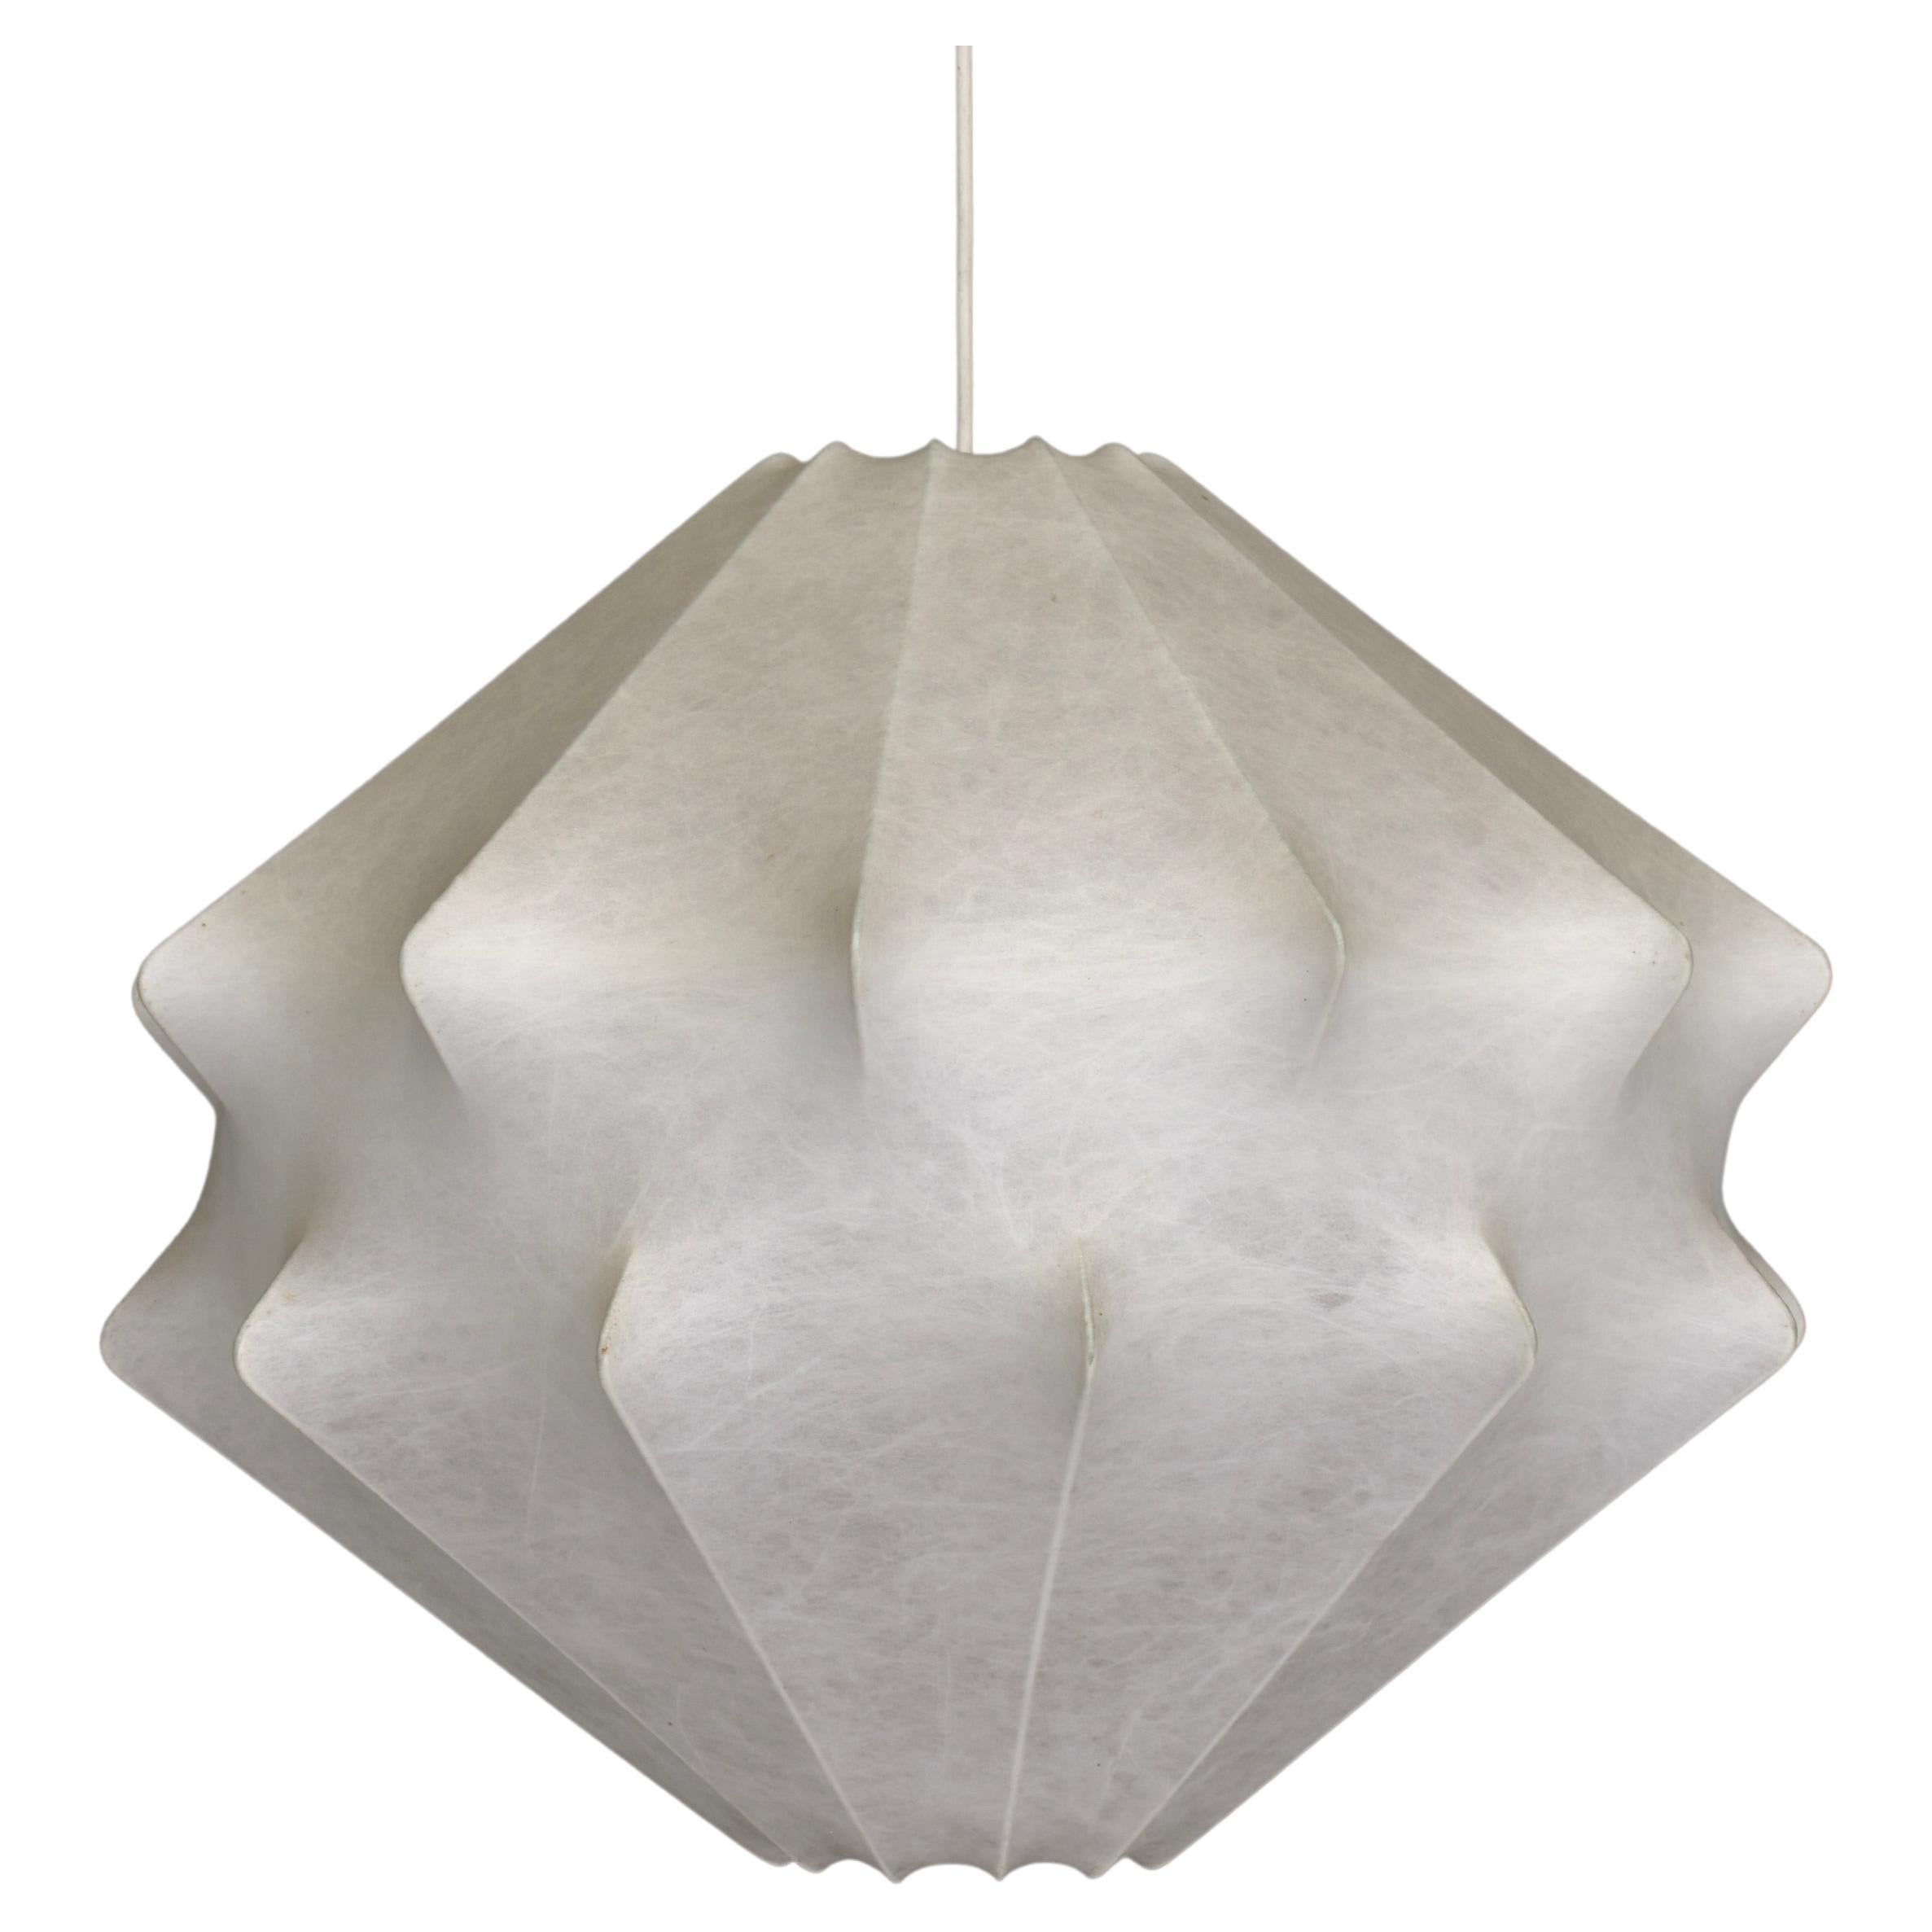 Goldkant Cocoon Pendant Lamp by Friedel Wauer, Germany, circa 1960